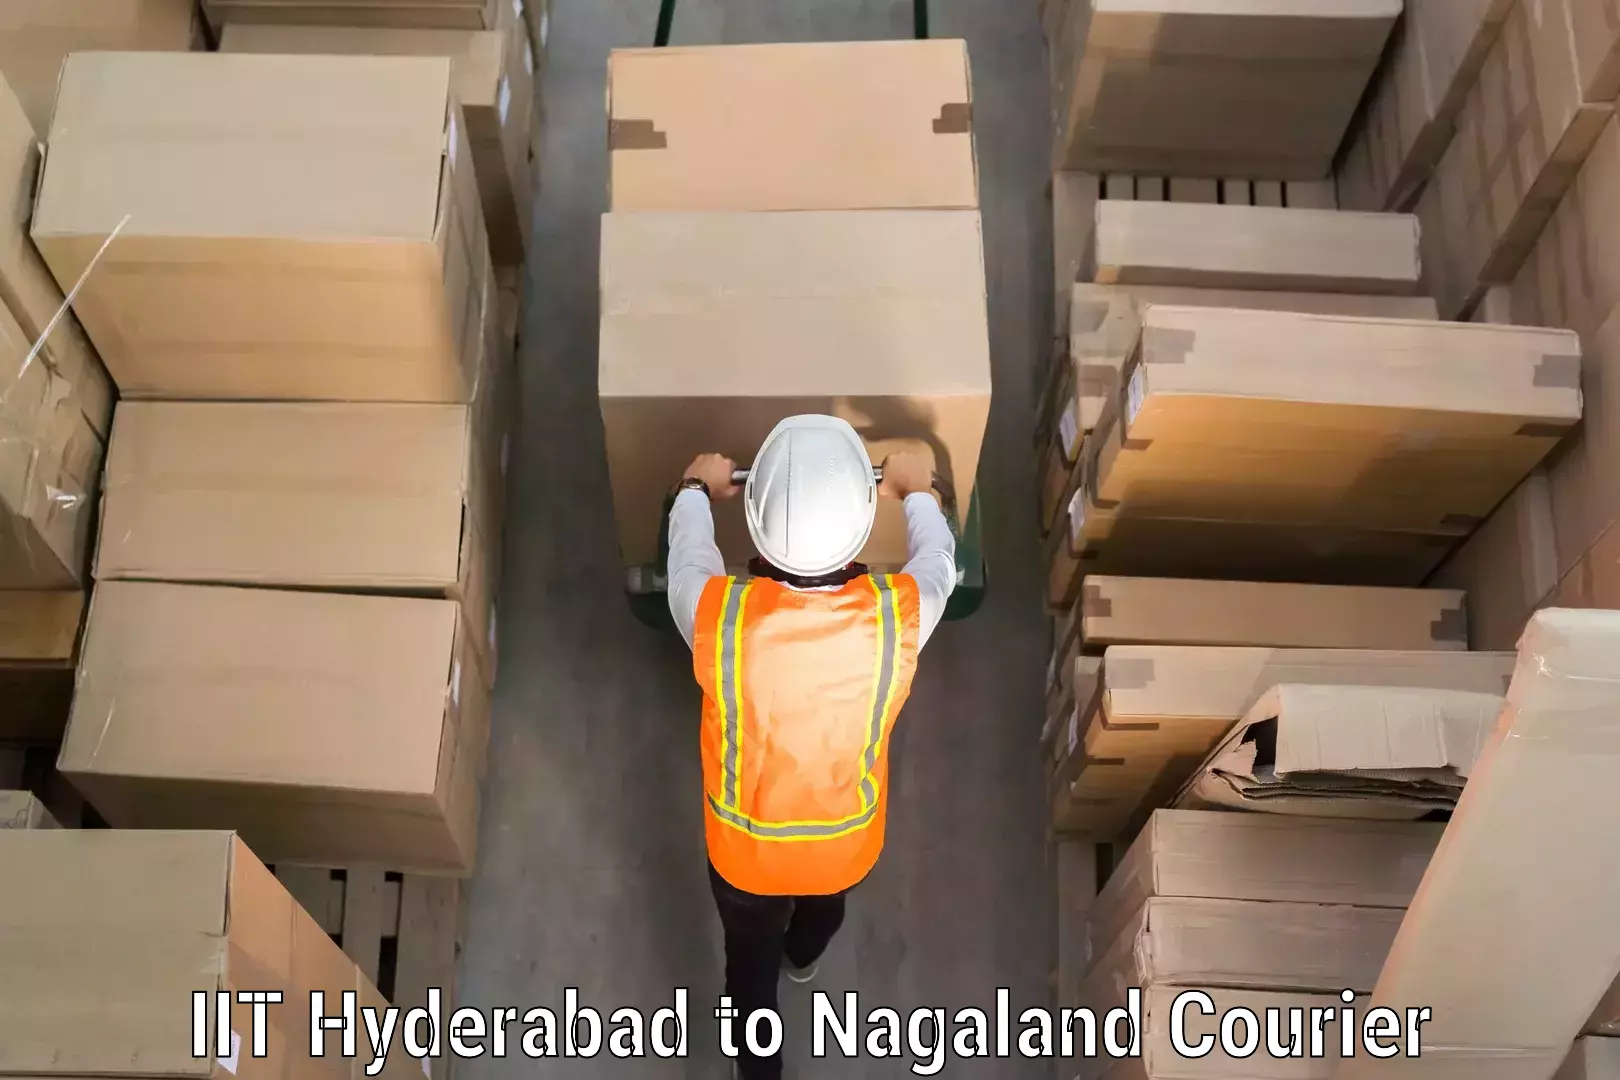 Baggage shipping service IIT Hyderabad to Dimapur